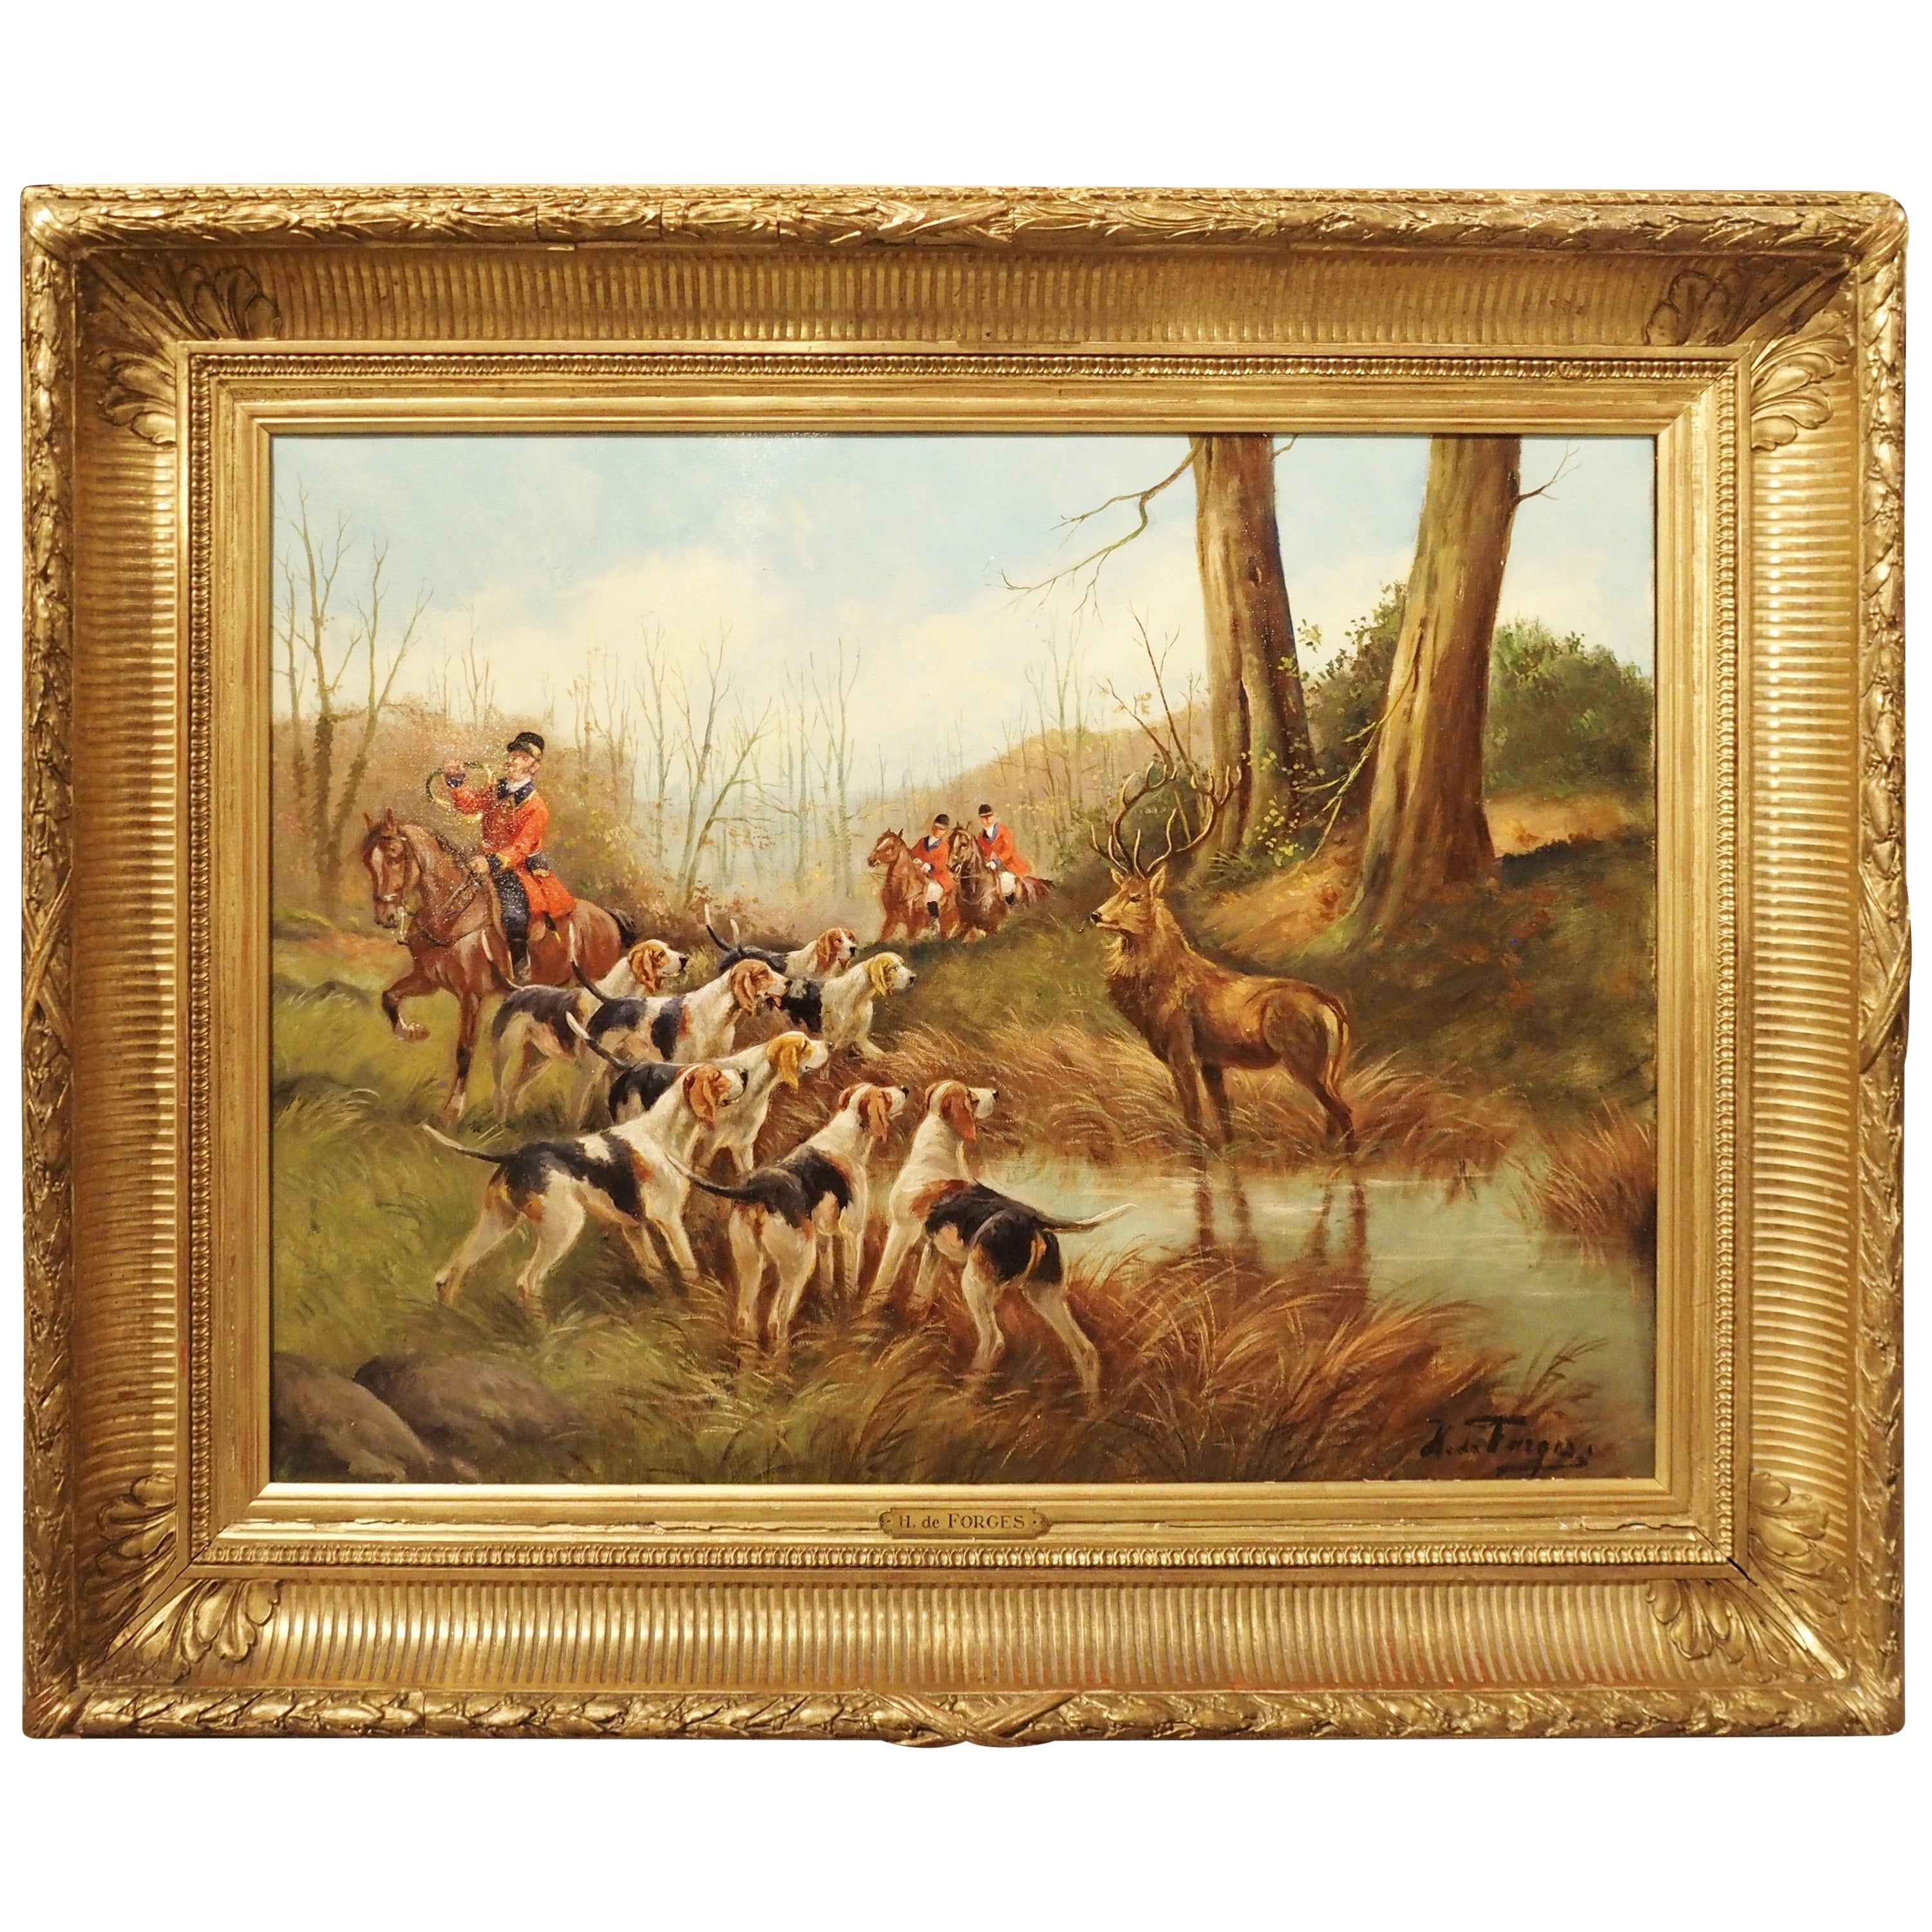 Antique French Oil on Canvas Stag Hunt Painting in Giltwood Frame, H. De Forges